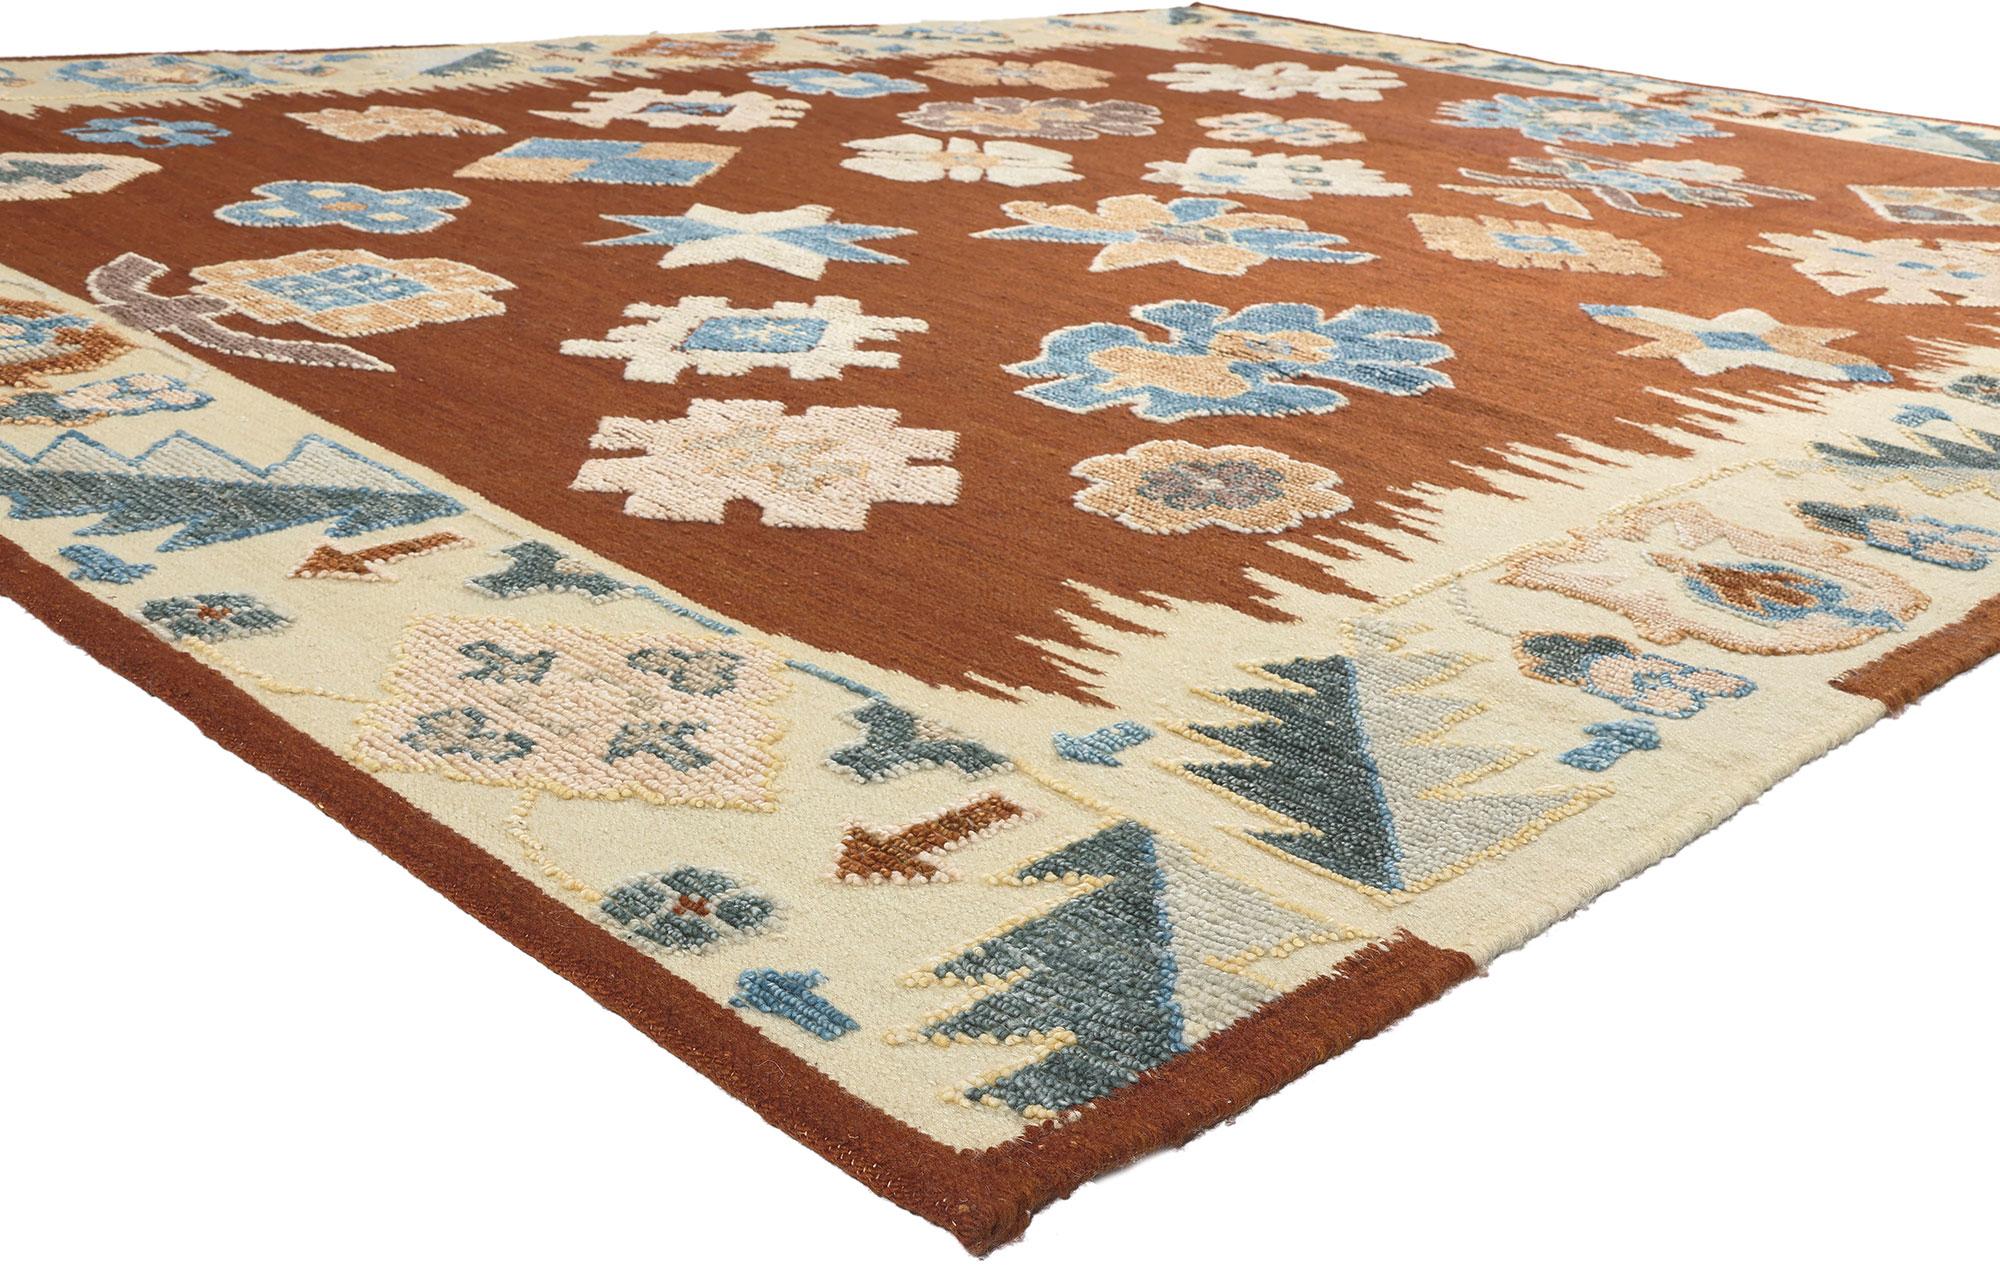 30892 New Modern Style Oushak High-Low Kilim Rug, 10'04 x 13'04. Showcasing a raised design with incredible detail and texture, this Oushak high-low rug is a captivating vision of woven beauty. The geometric pattern and earthy colorway woven into